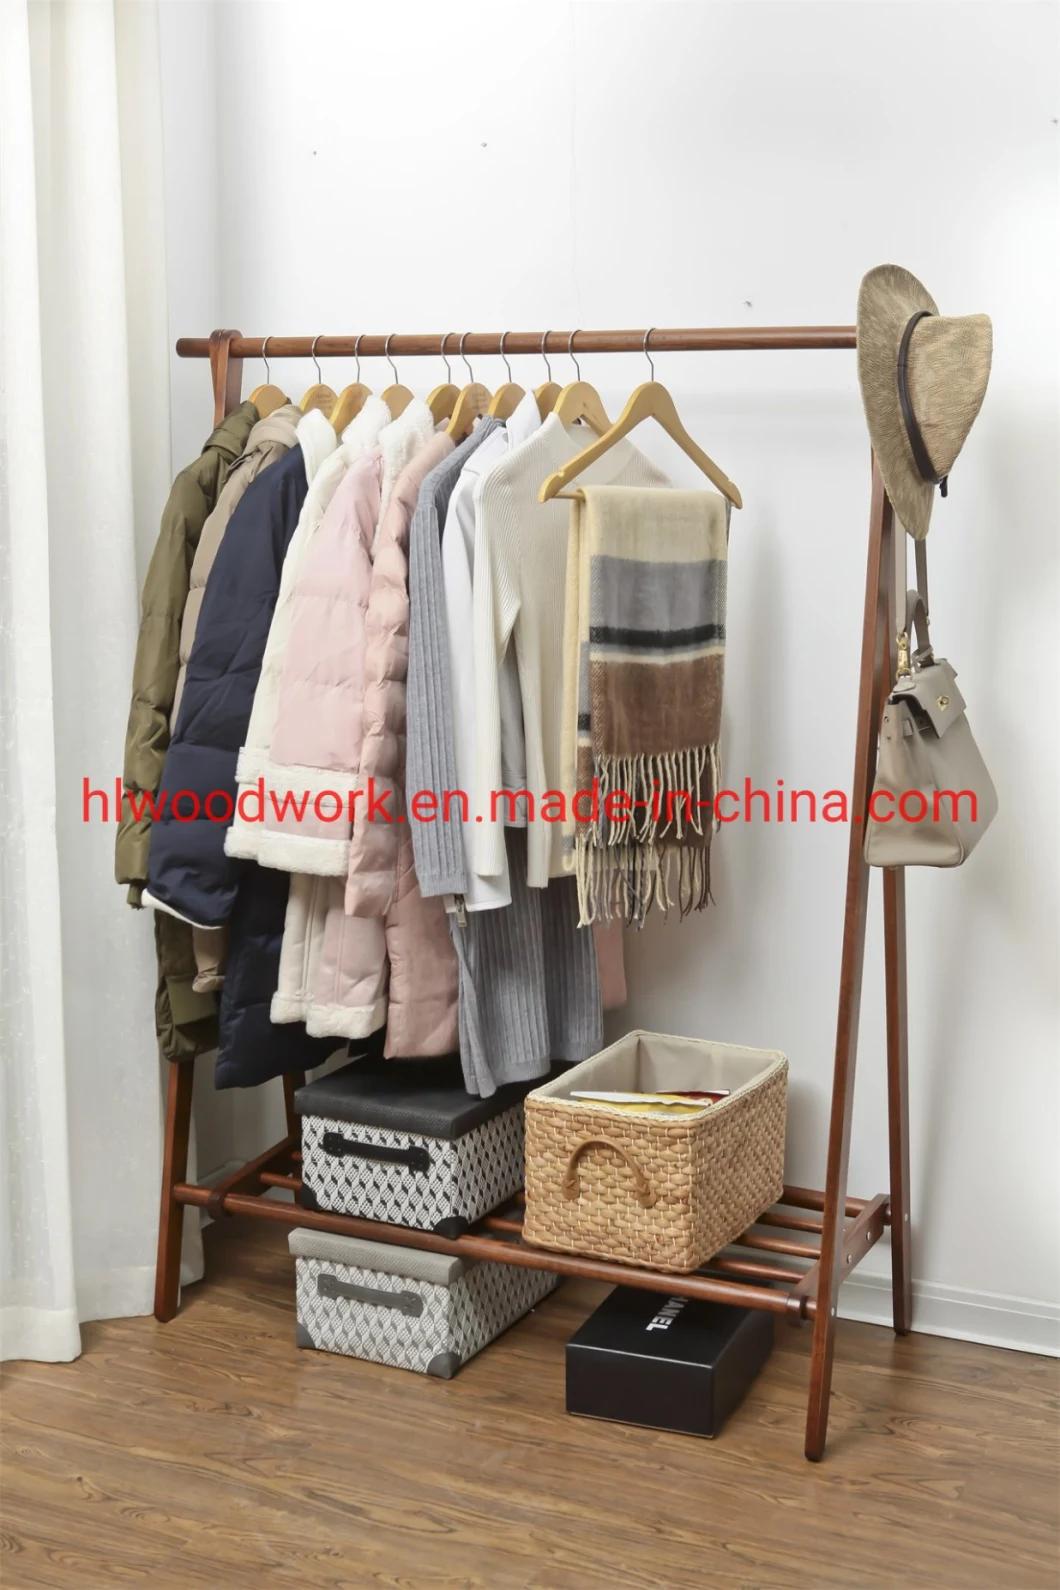 Beech Wood Stand Coat Rack Stand Hanger Foyer Furniture Brown Color Fabric Style Living Room Coat Rack Hotel Furniture Entrance Hall Coat Rack Beechwood Natural